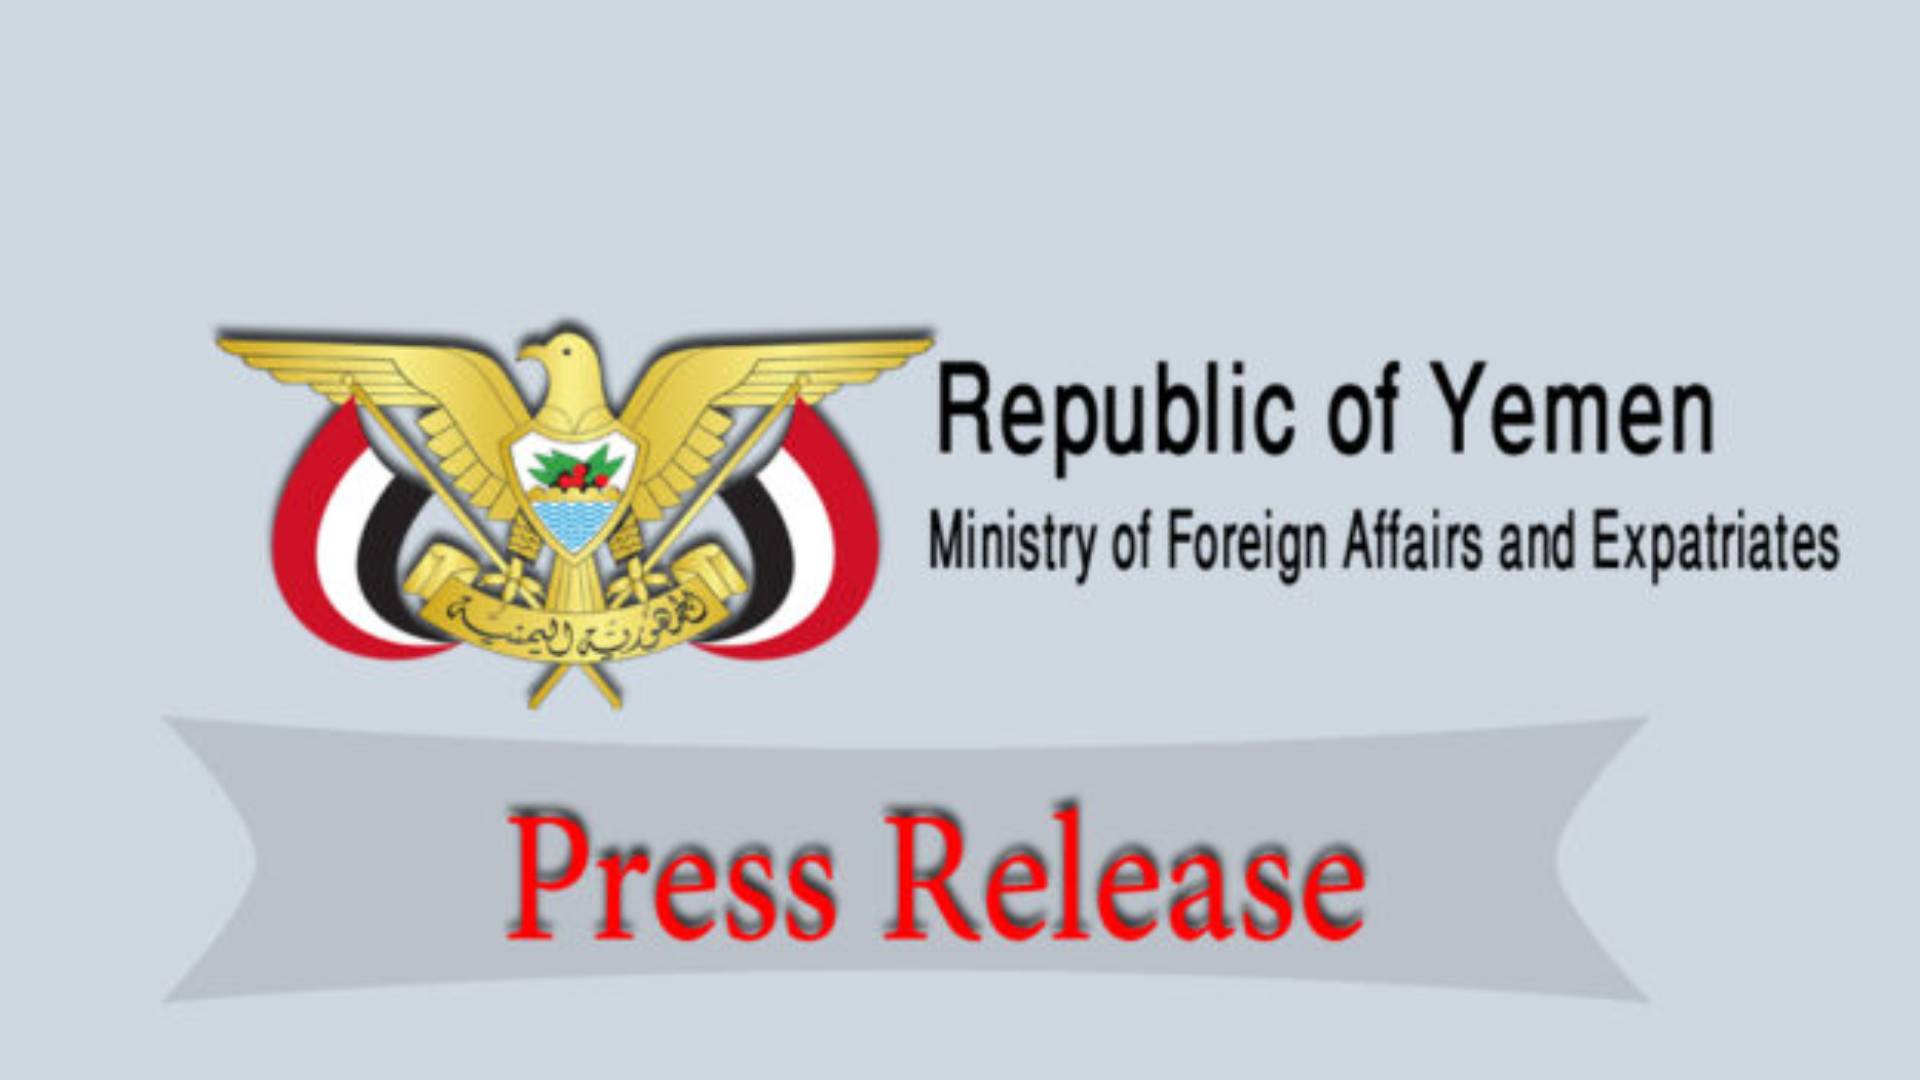   Yemen's Foreign Affairs and Expatriates Ministry's logo.